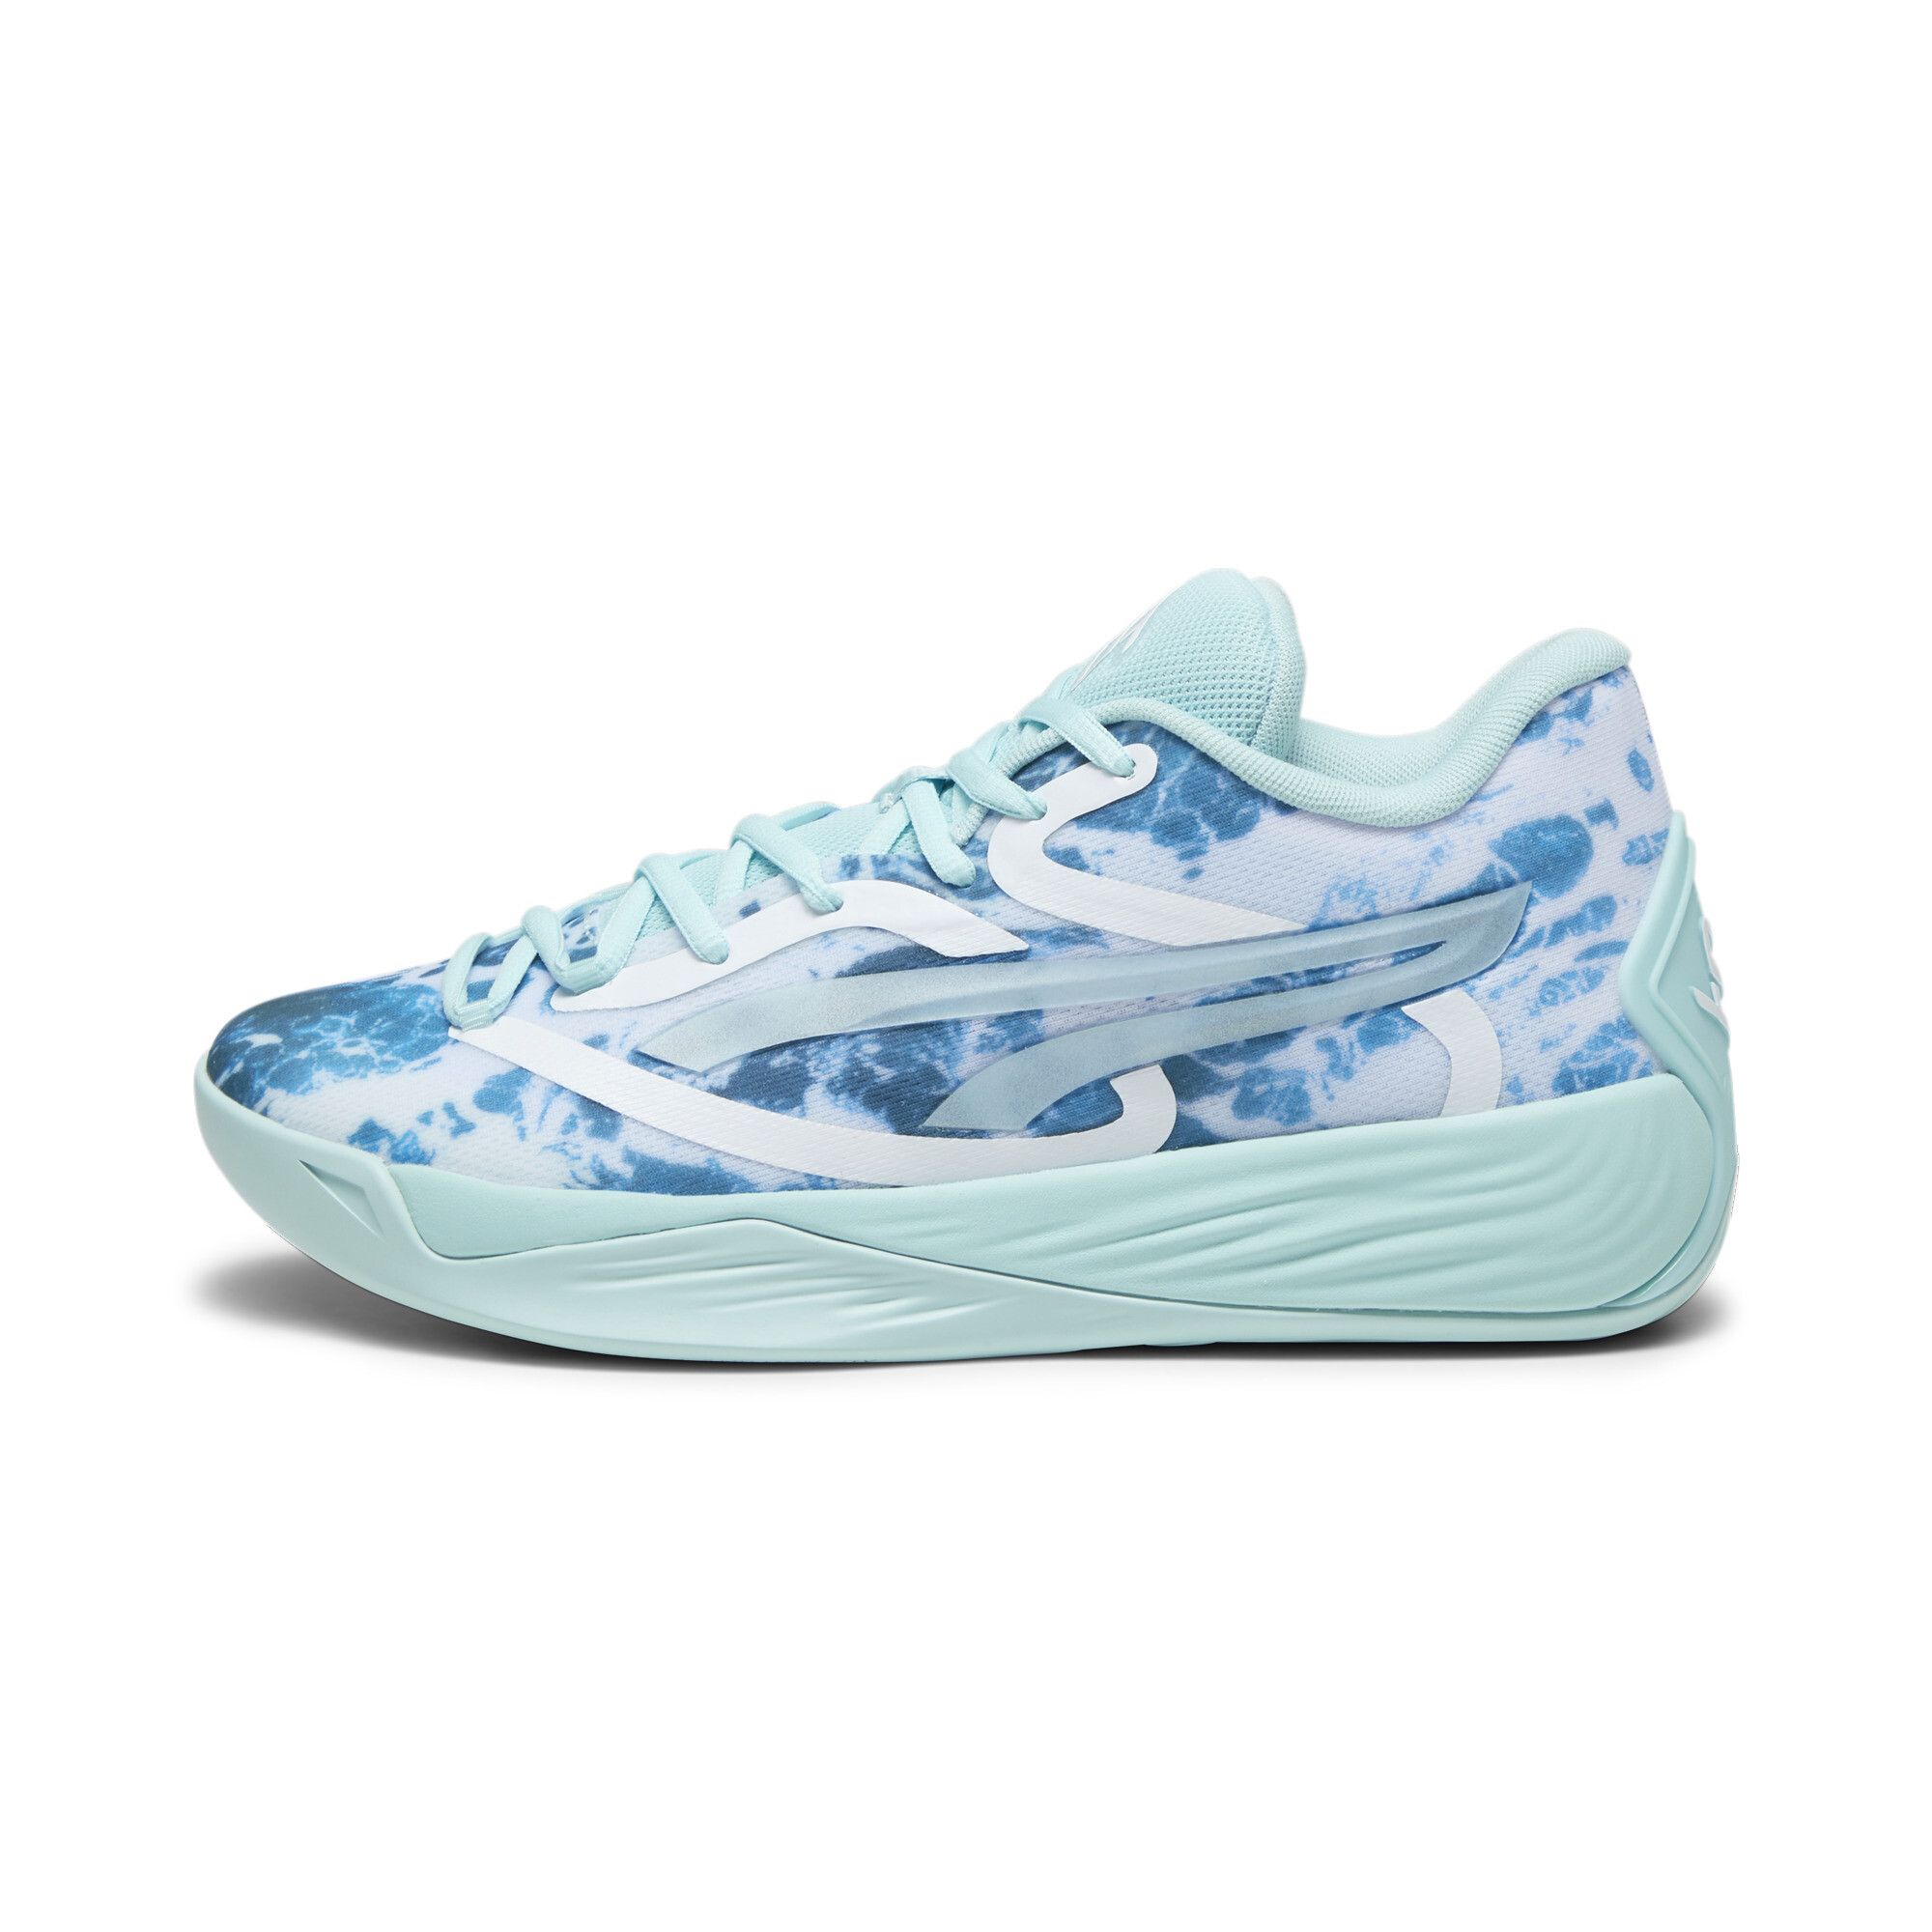 Women's Puma Stewie 2 Water's Basketball Shoes, Blue, Size 38.5, Shoes